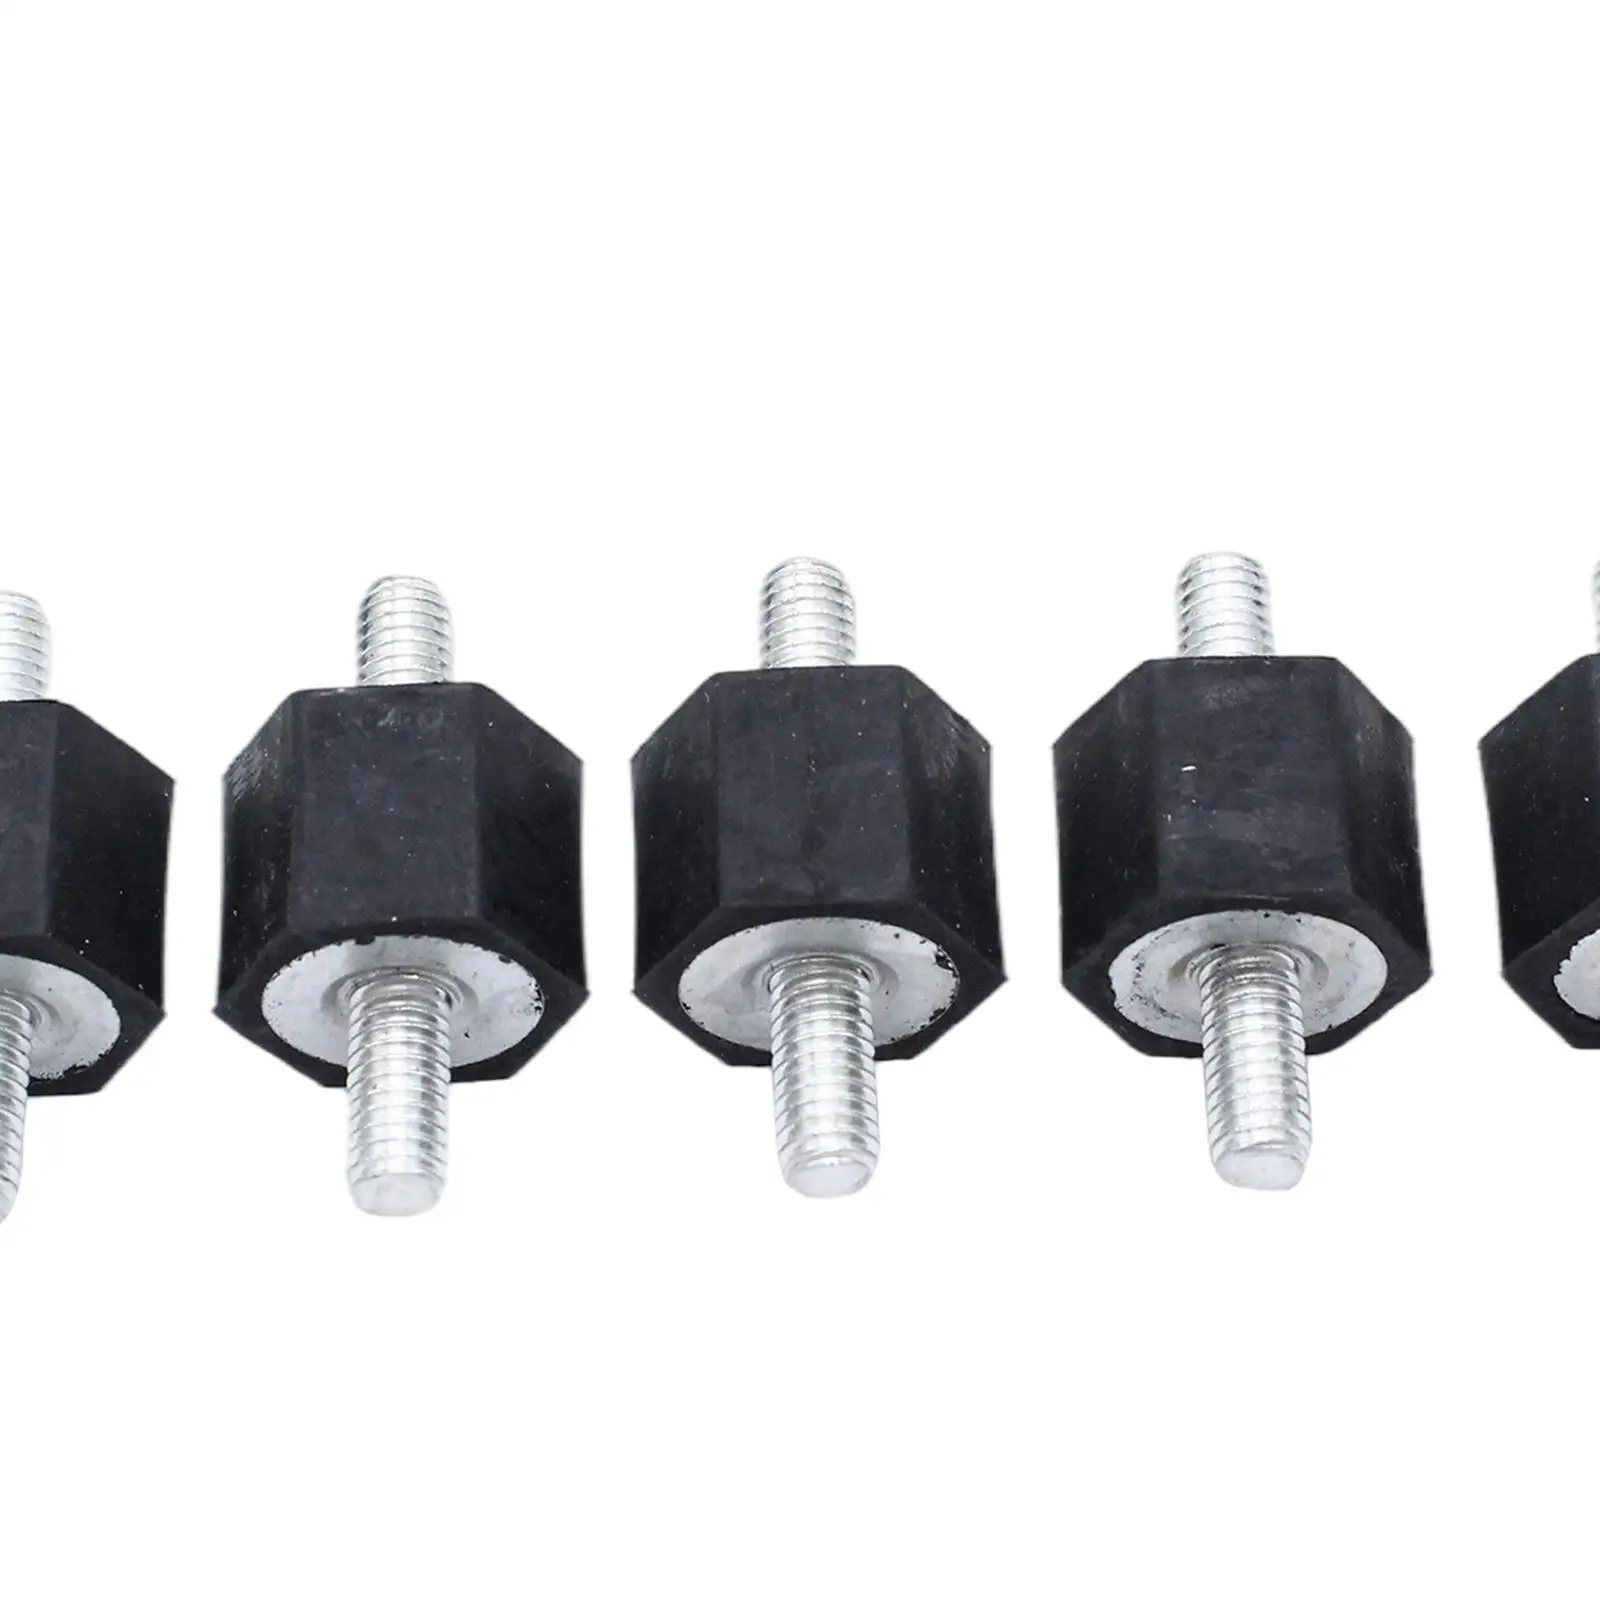 5x Fuel Pump Engine Cover Rubber Mounts for Golf MK2 for B4